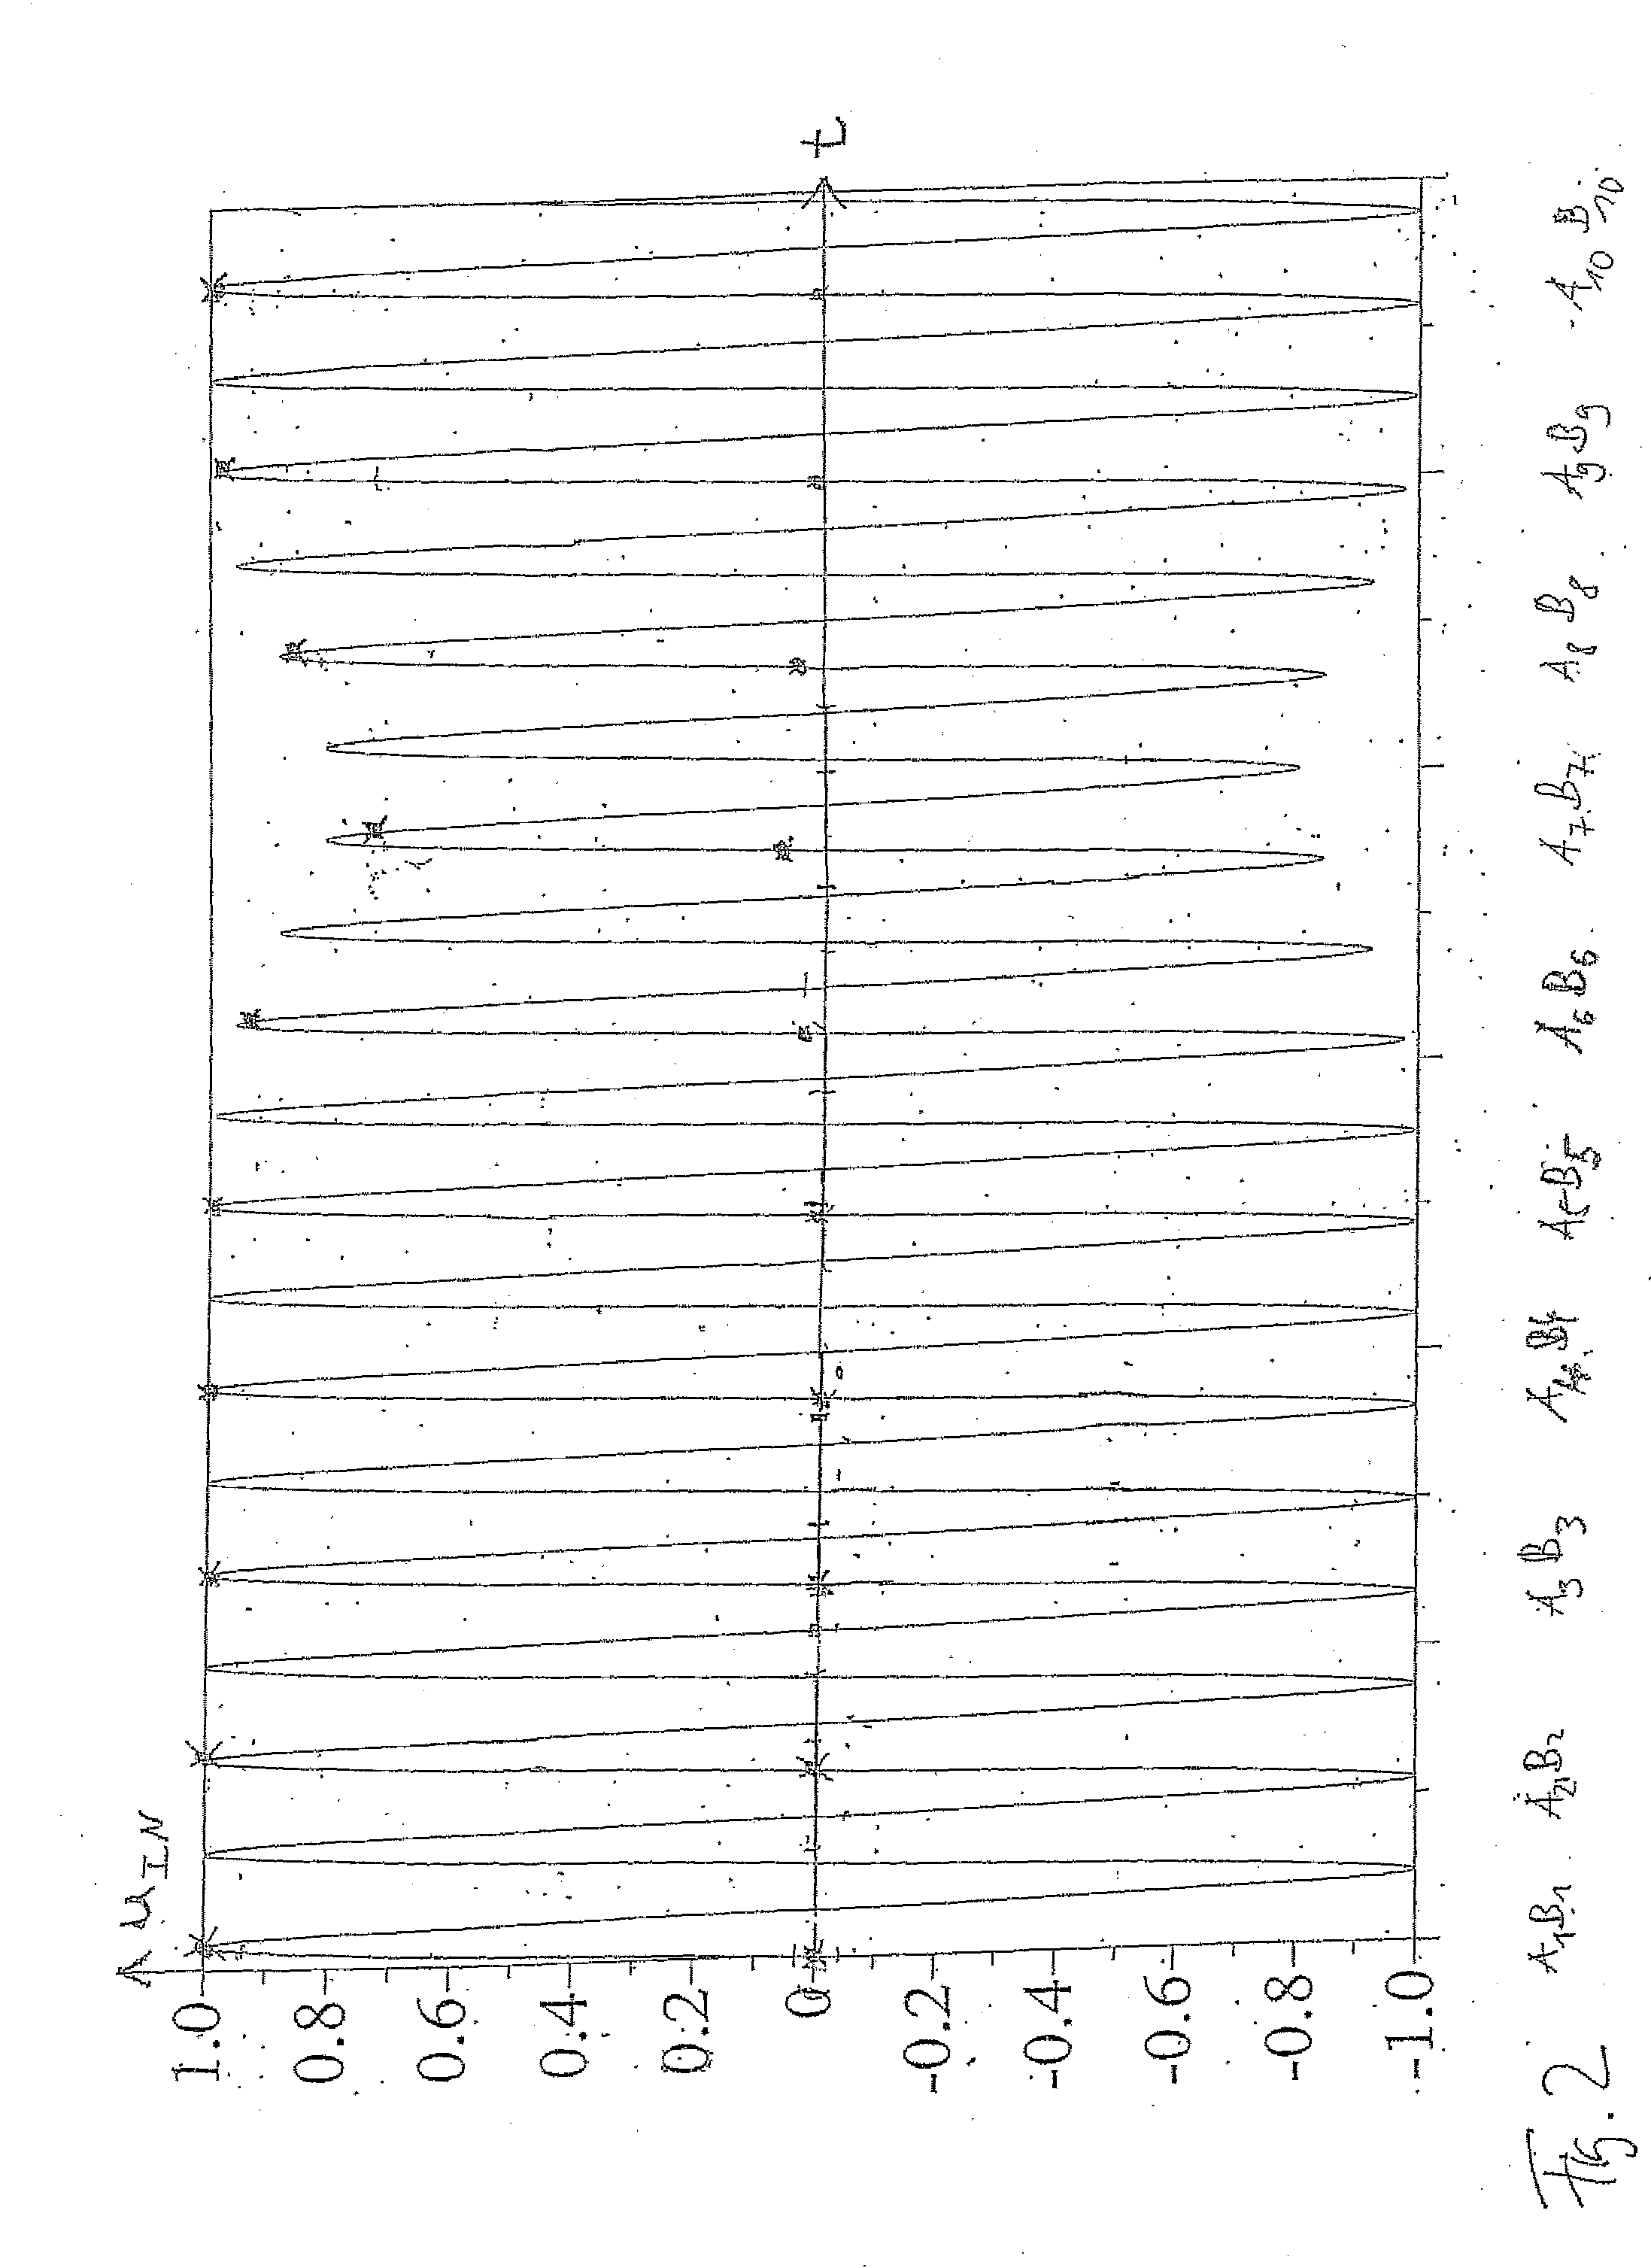 Method and device for the non-destructive and contactless detection of flaws in a test piece moved relative to a probe